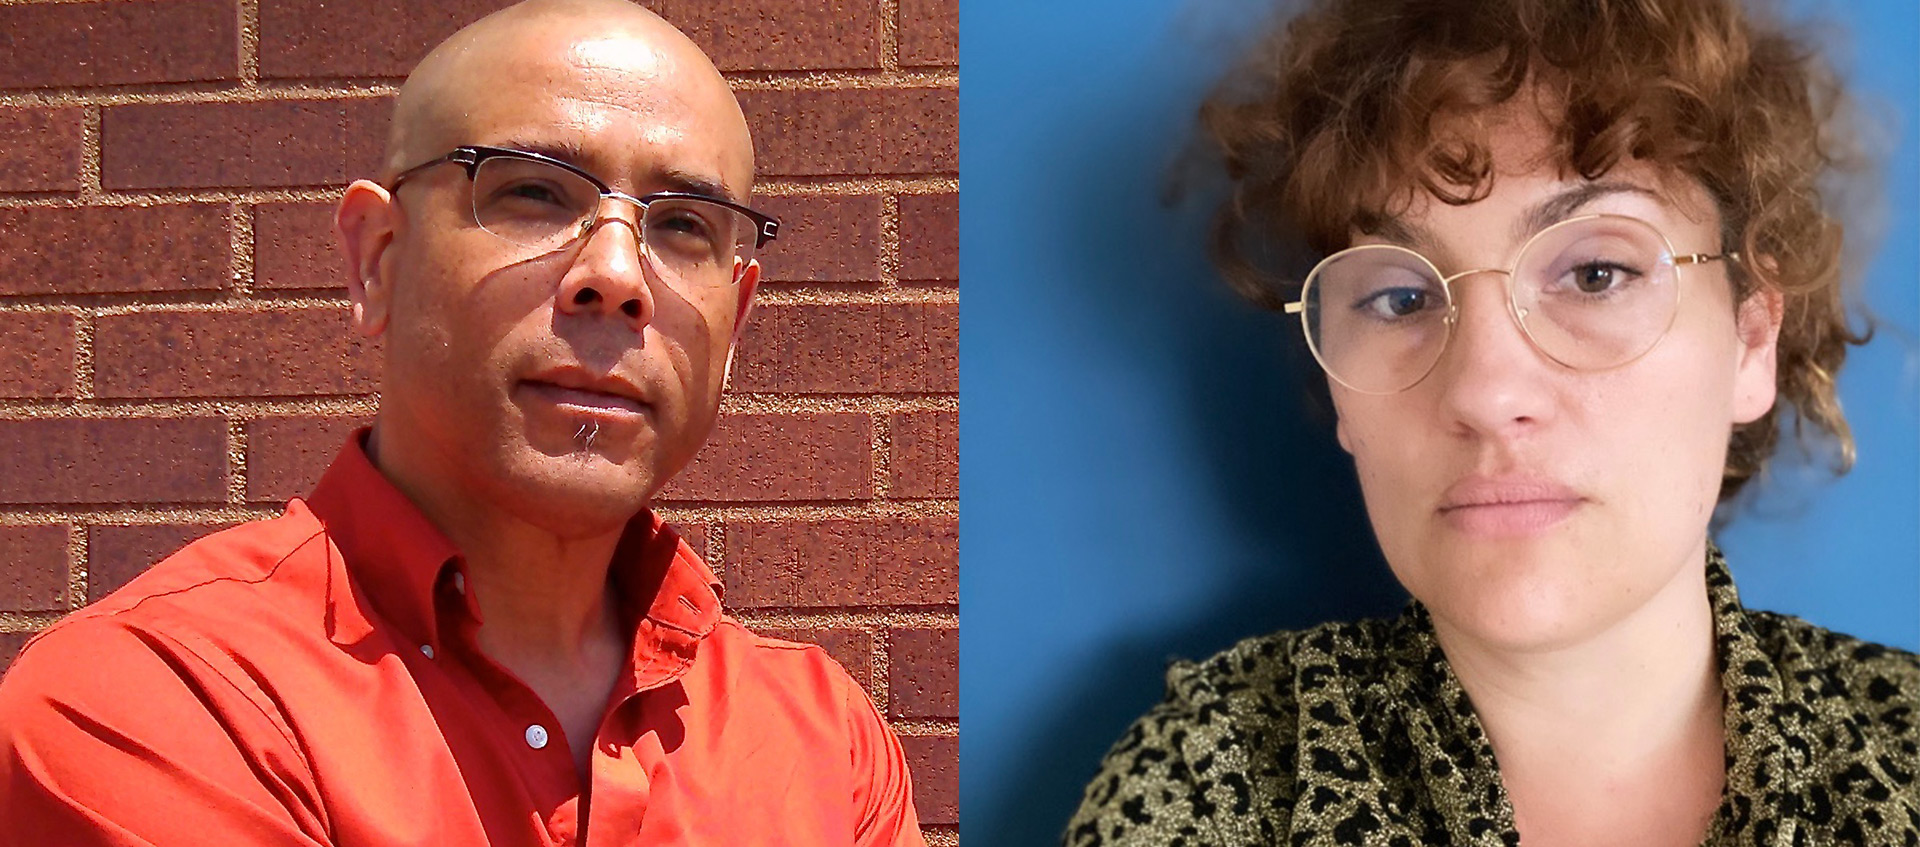 A photo of Maurice Stevens and Lucille Toth. Maurice is on the right wearing glasses and and orange shirt. He stands in front of a brick wall. Lucille is on the right wearing glasses and standing in front of a blue background